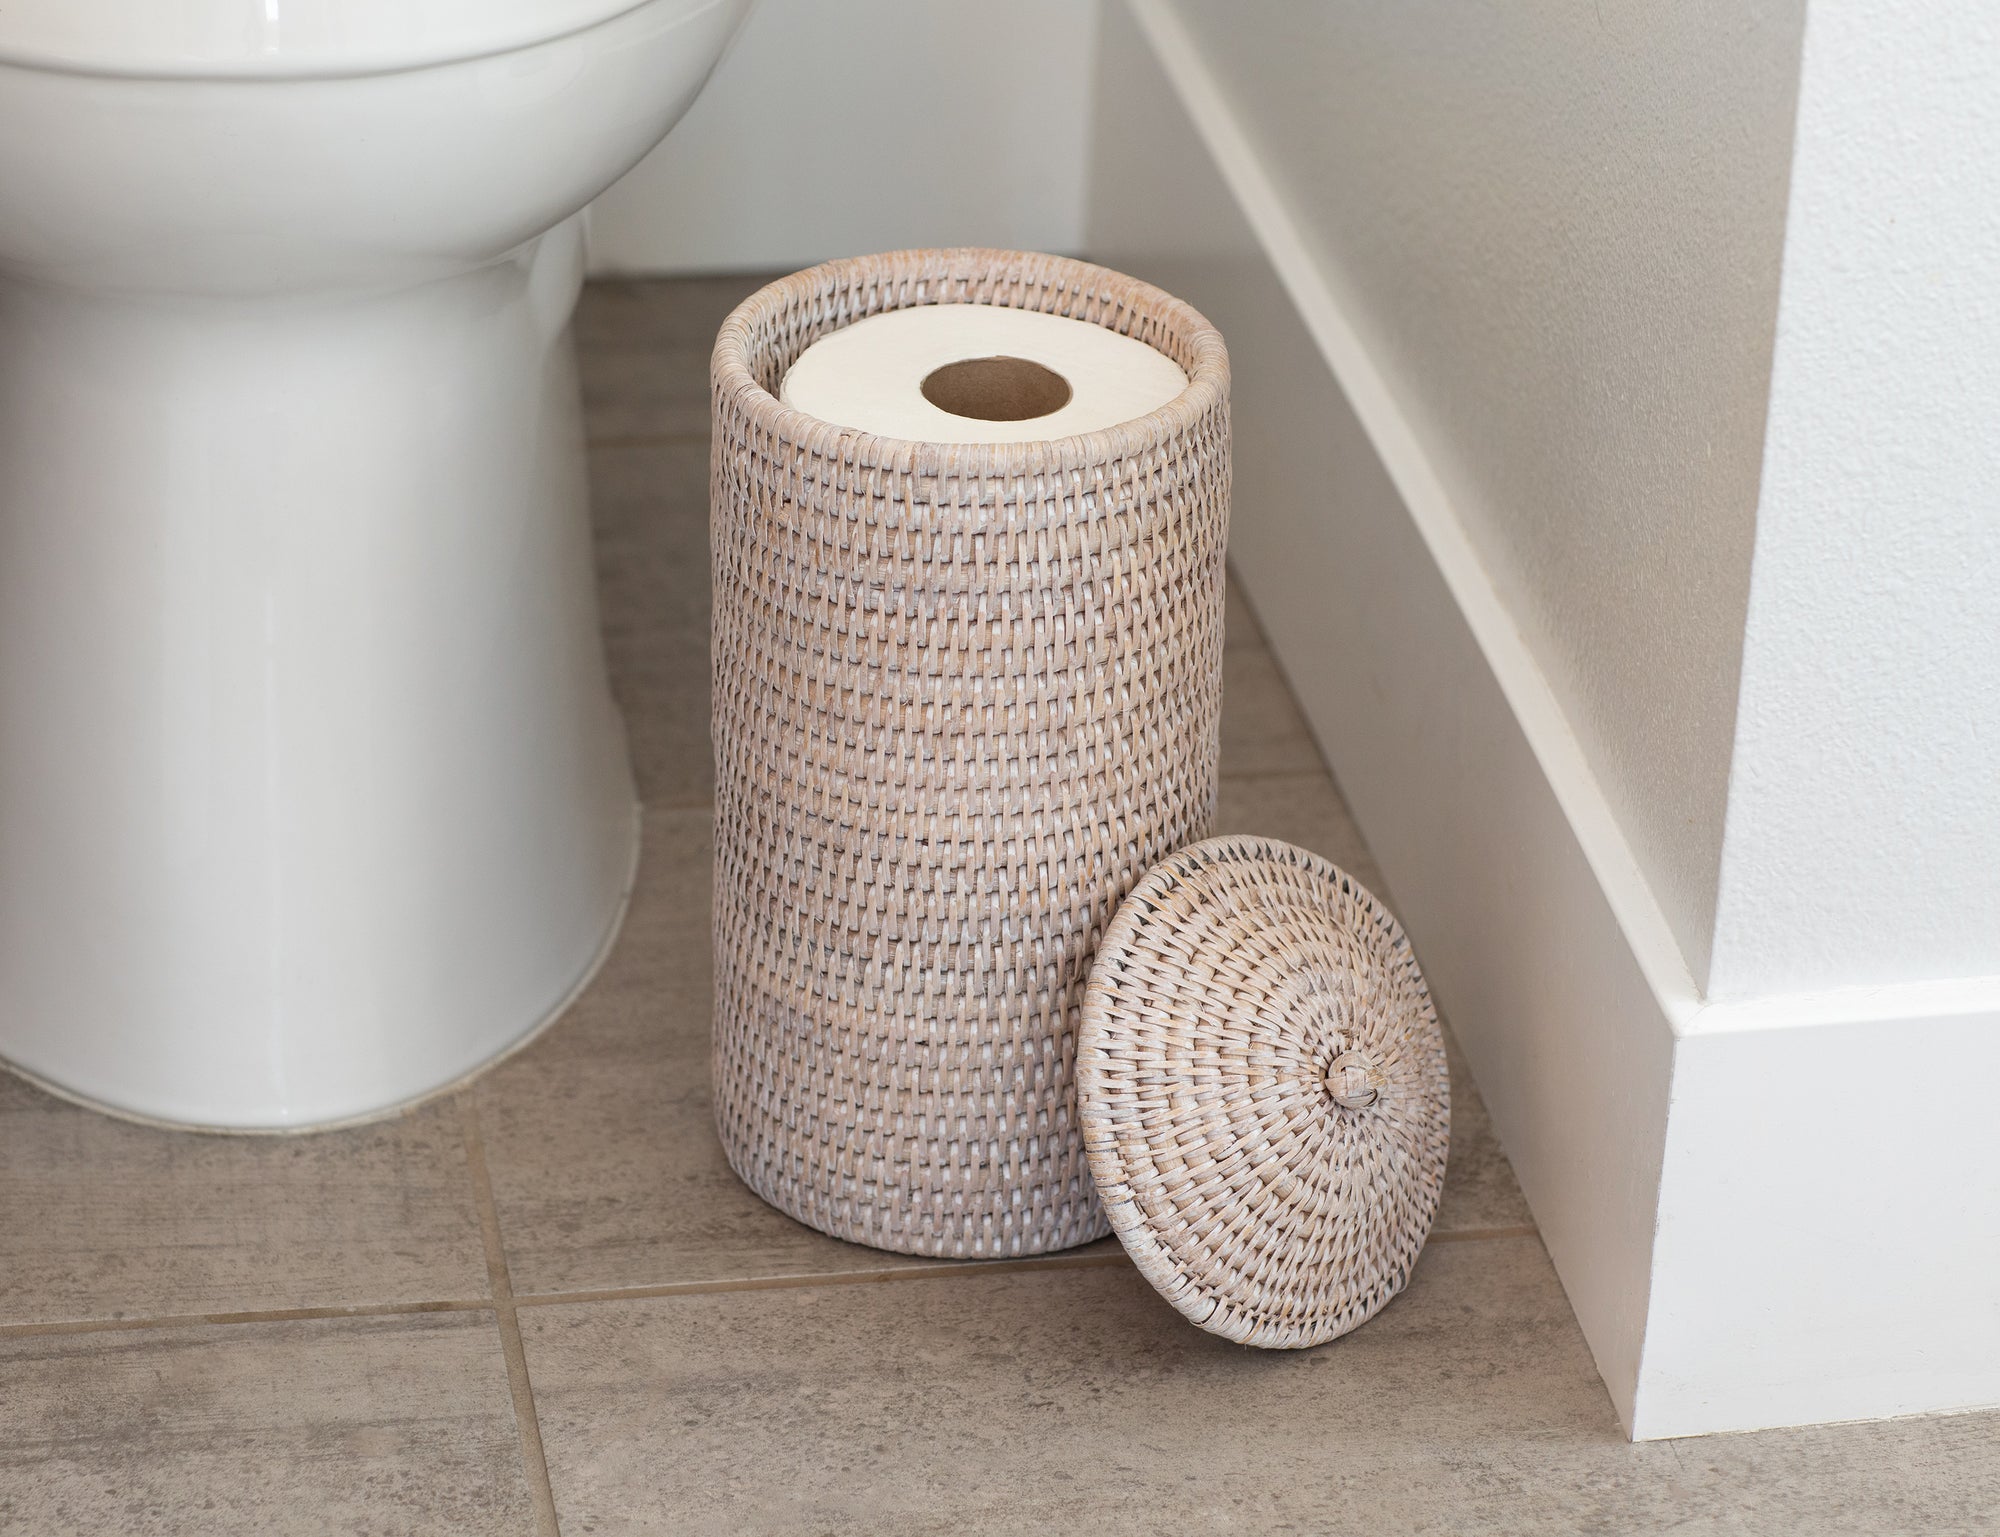 Bamboo Double Toilet Paper Roll Holder